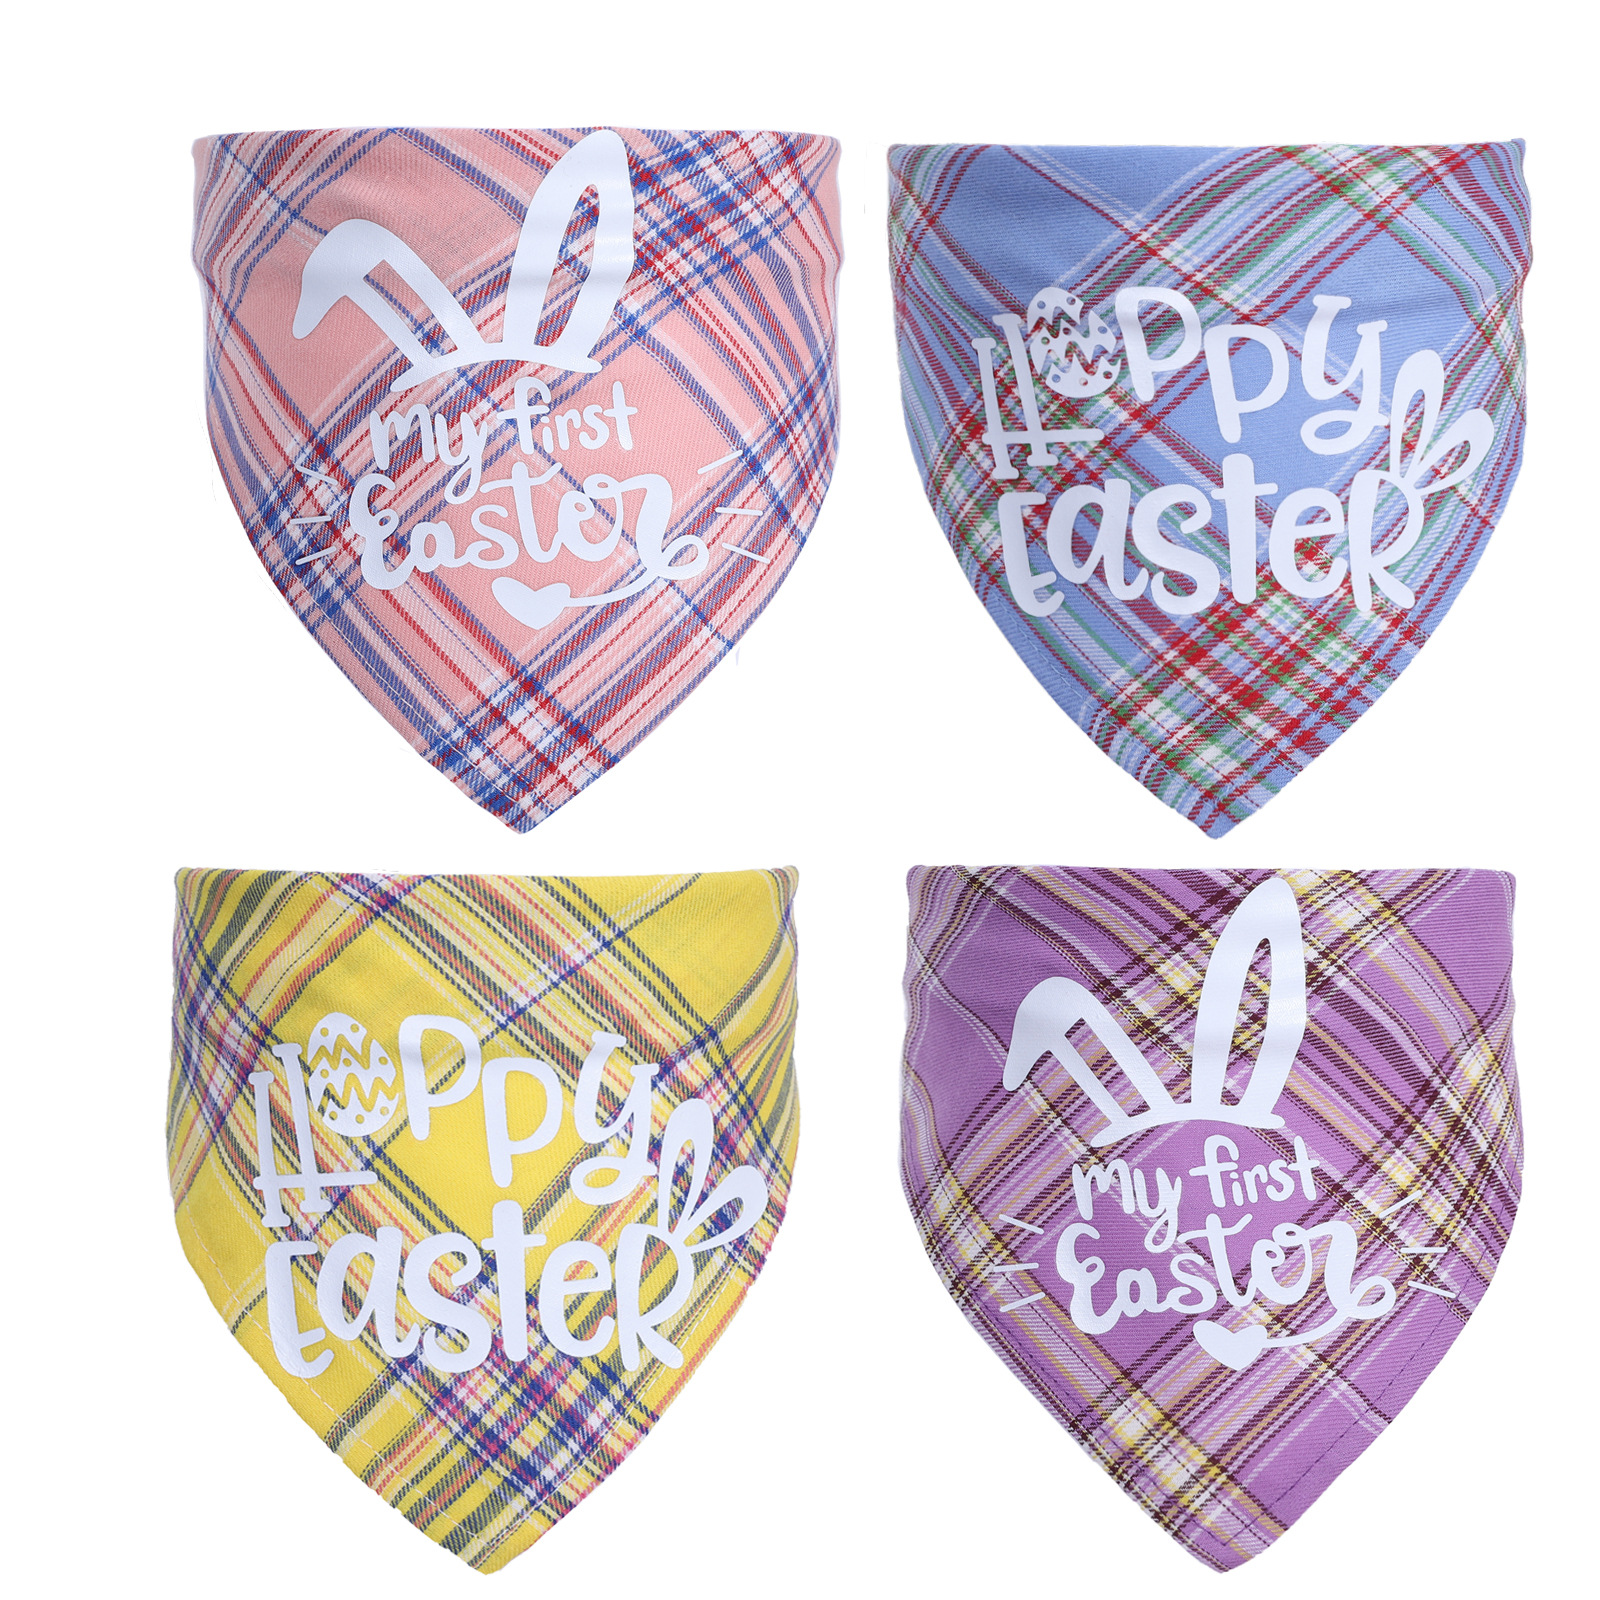 Get your furry friend in the Easter spirit with our adorable Easter bandanas for dogs! Made with soft and durable materials, these bandanas feature cute and colorful designs that will make your pooch the talk of the town during the Easter holiday.